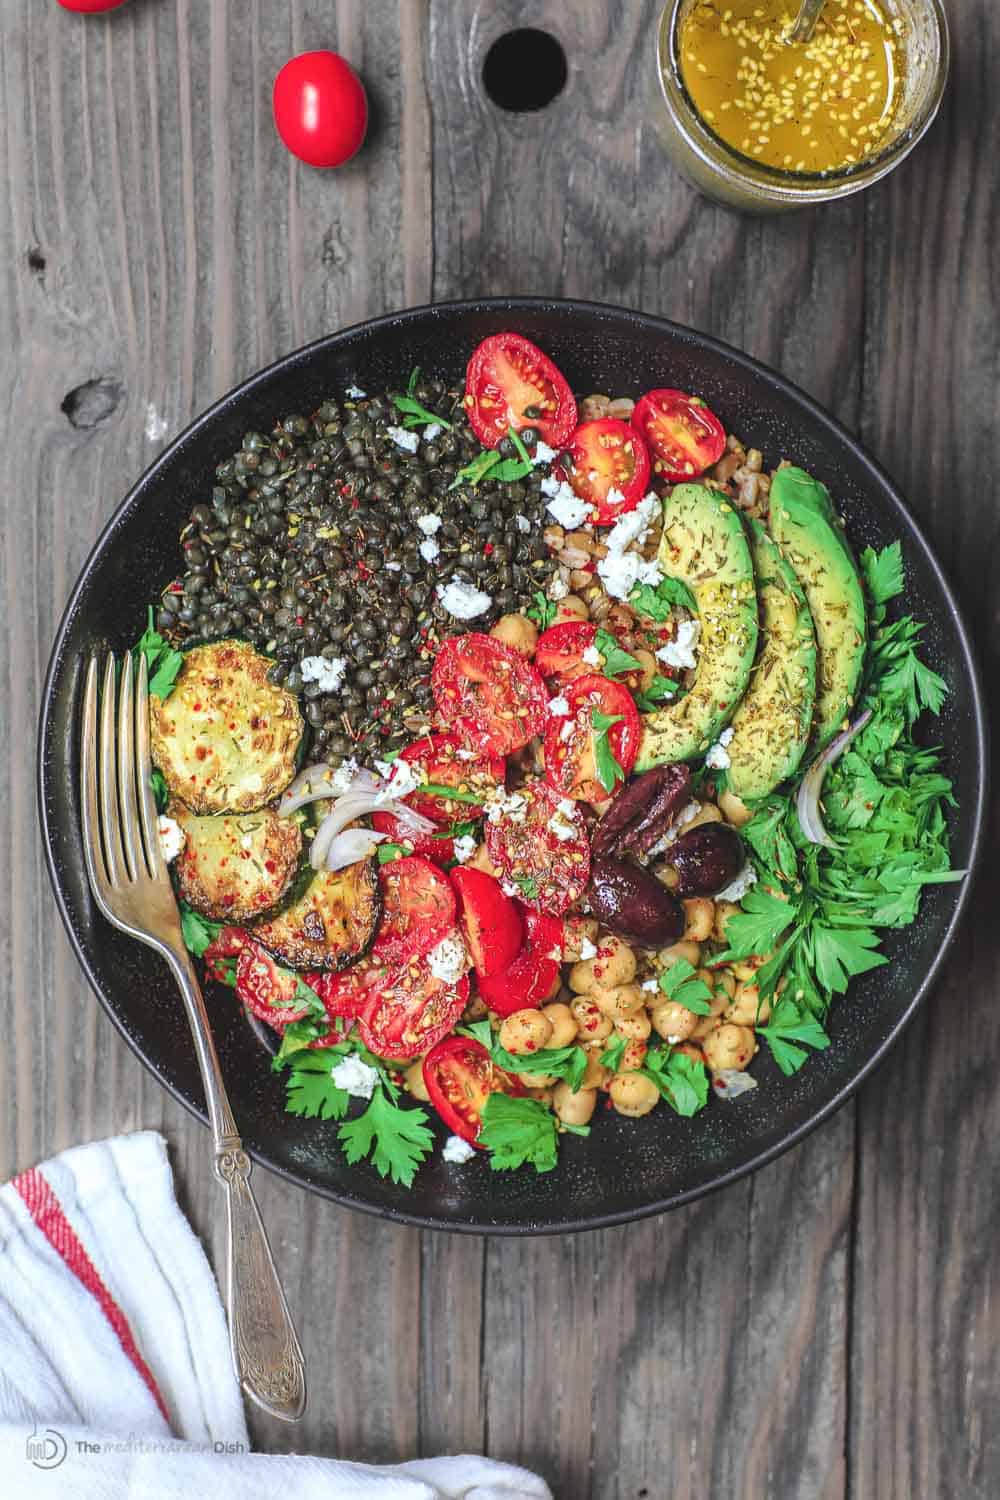 Mediterranean Grain Bowls with lentils, zucchini, avocados, tomatoes and topped with feta cheese.